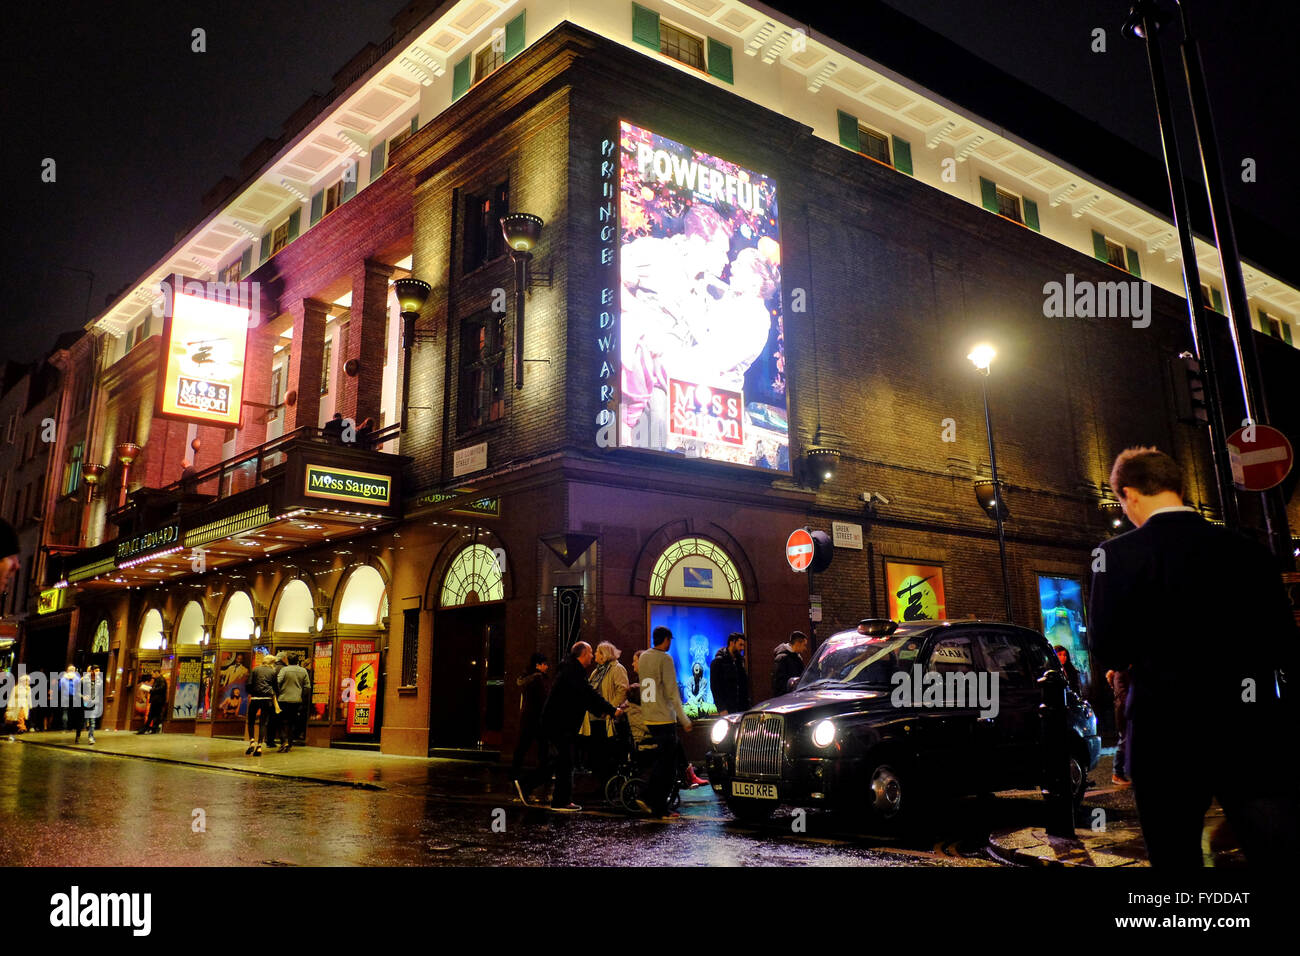 Prince Edward Theater showing Miss Saigon at night with taxi and people in Soho, London Stock Photo